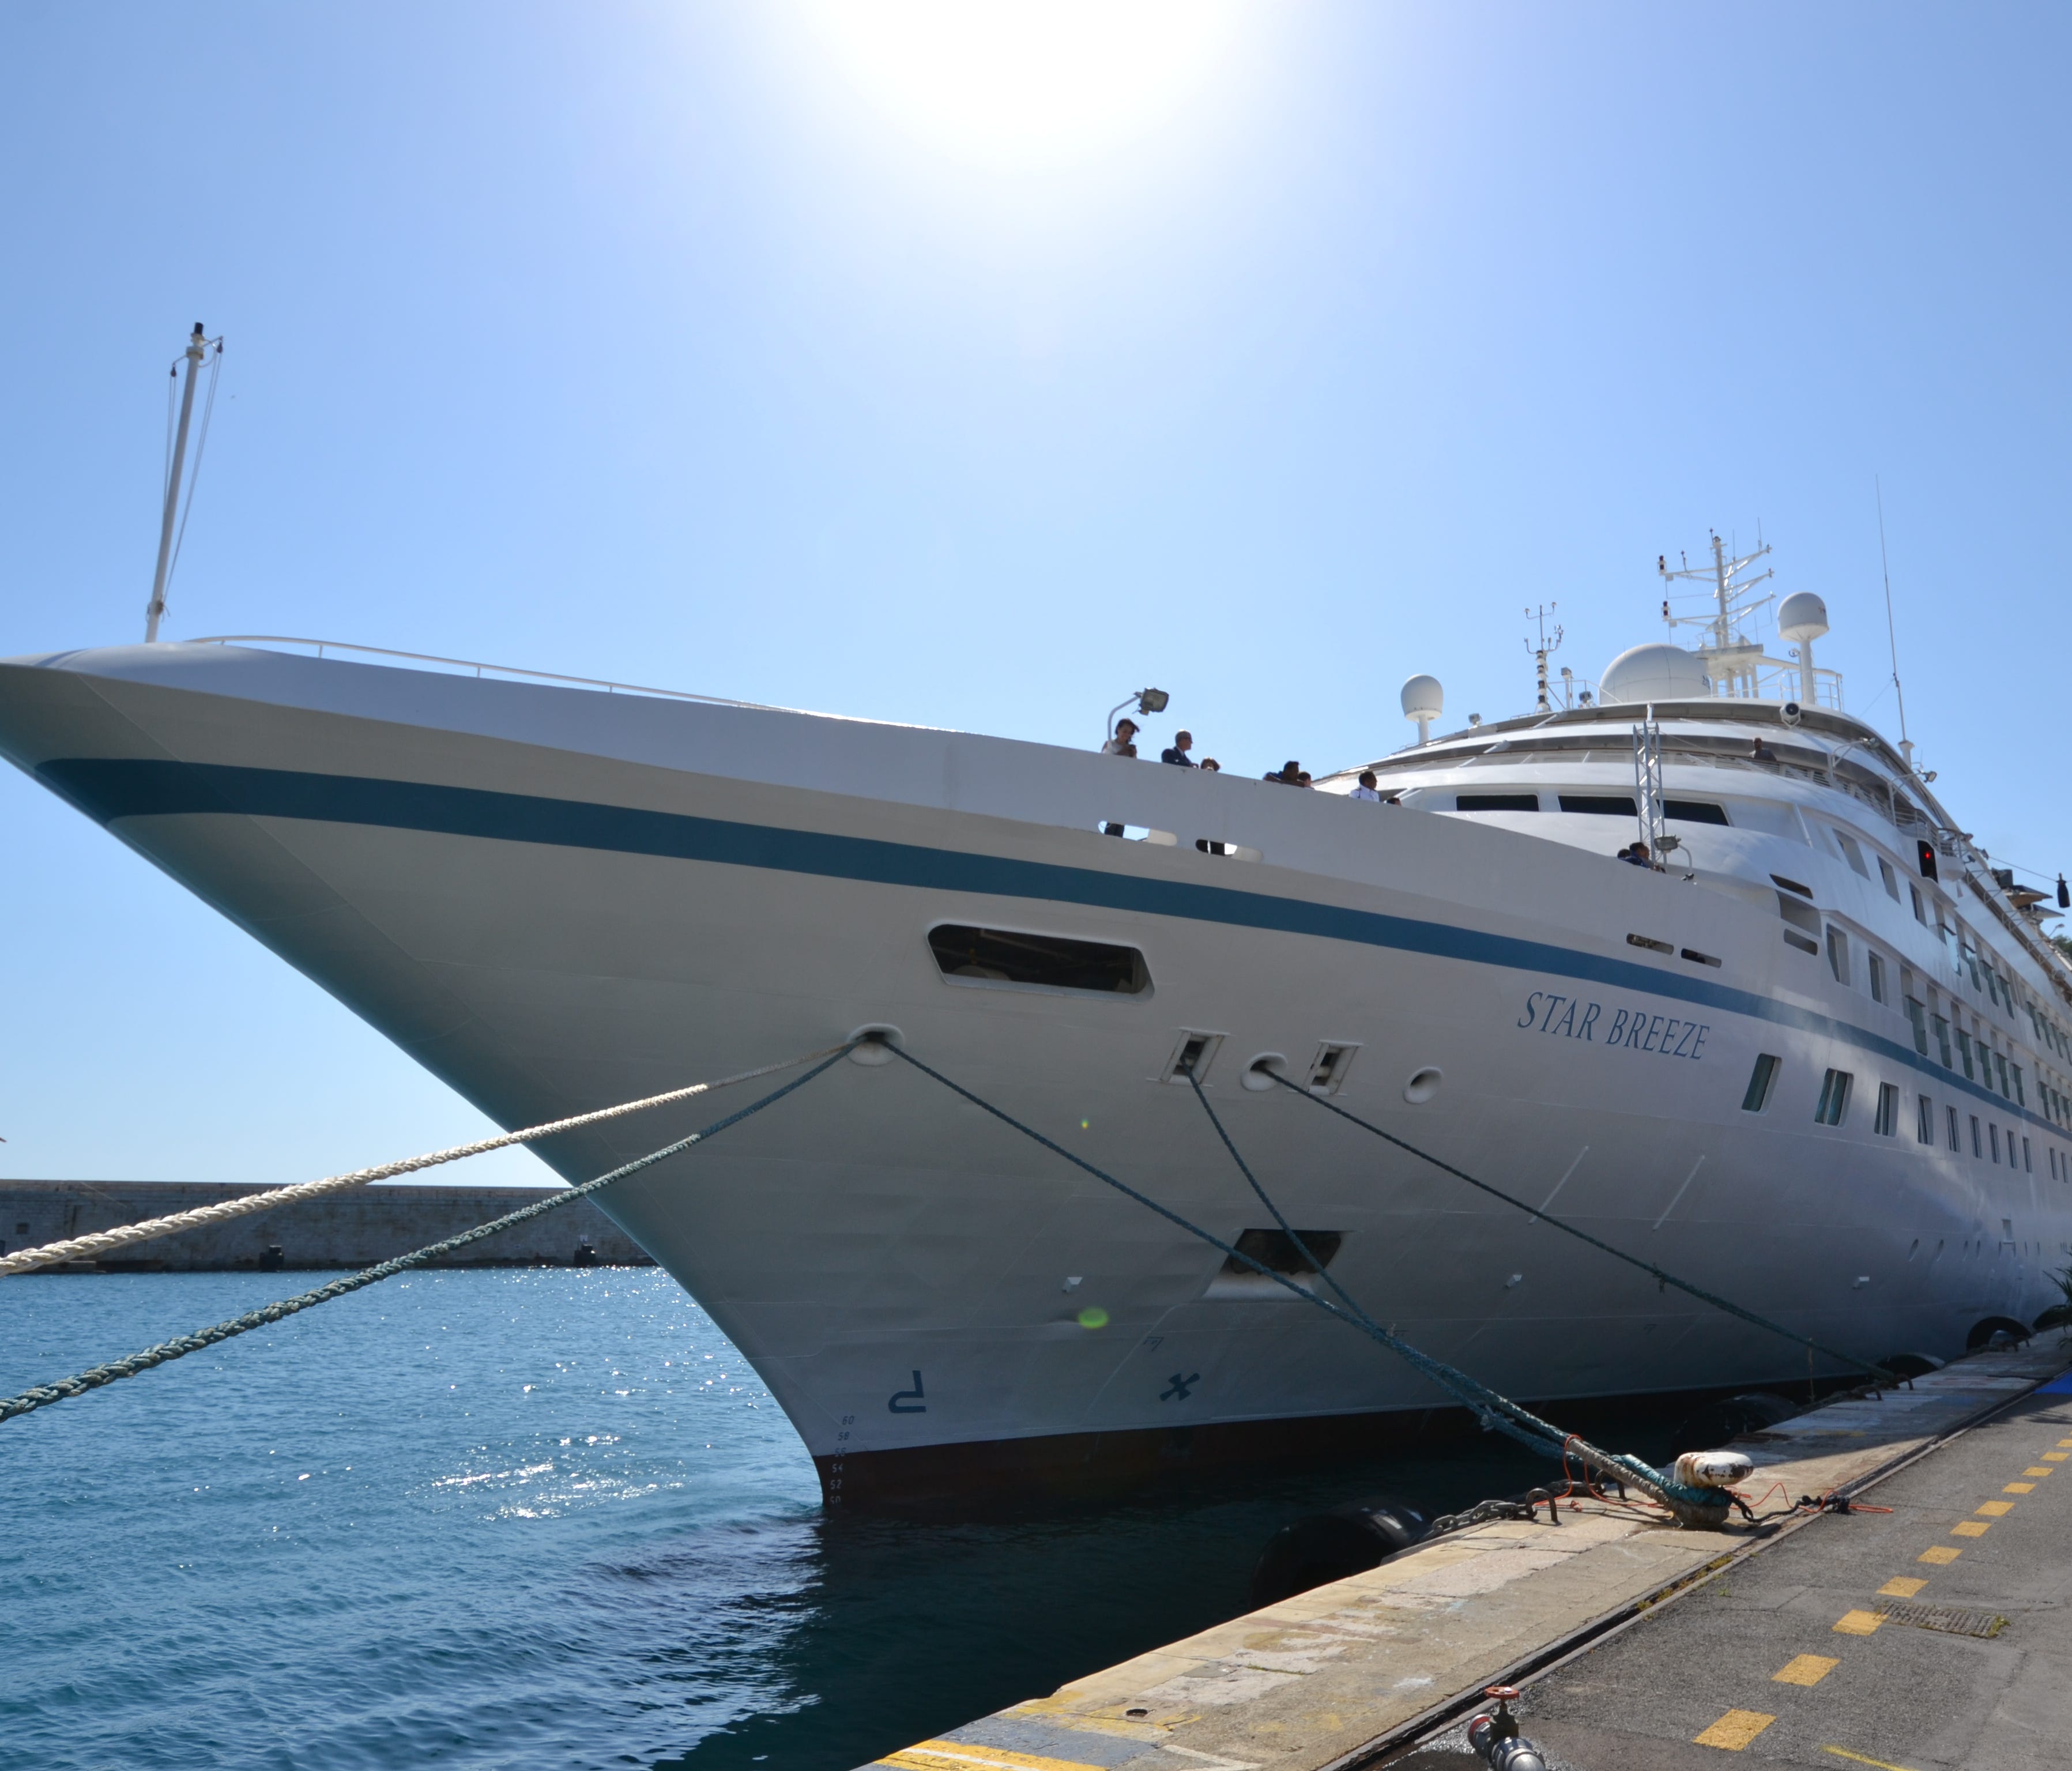 Originally launched in 1989, the Star Breeze is a former Seabourn Cruise Line ship that Windstar has purchased and revamped.